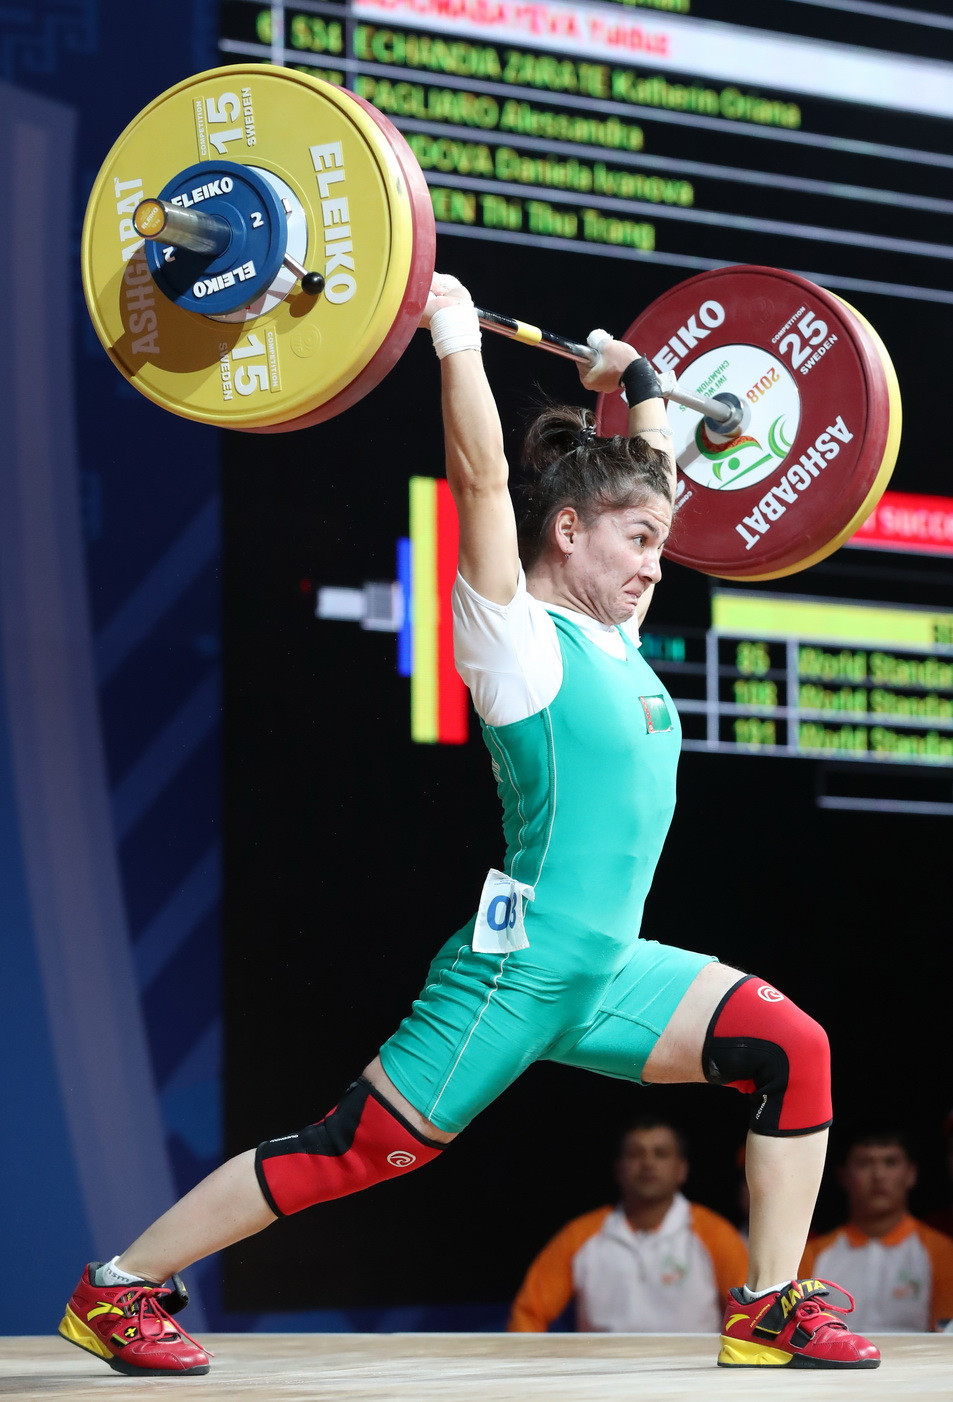 Home athlete Yulduz Dzhumabayeva today had two of her bronze medals from yesterday’s women’s 45 kilograms event at the 2018 International Weightlifting Federation World Championships upgraded to silver ©IWF